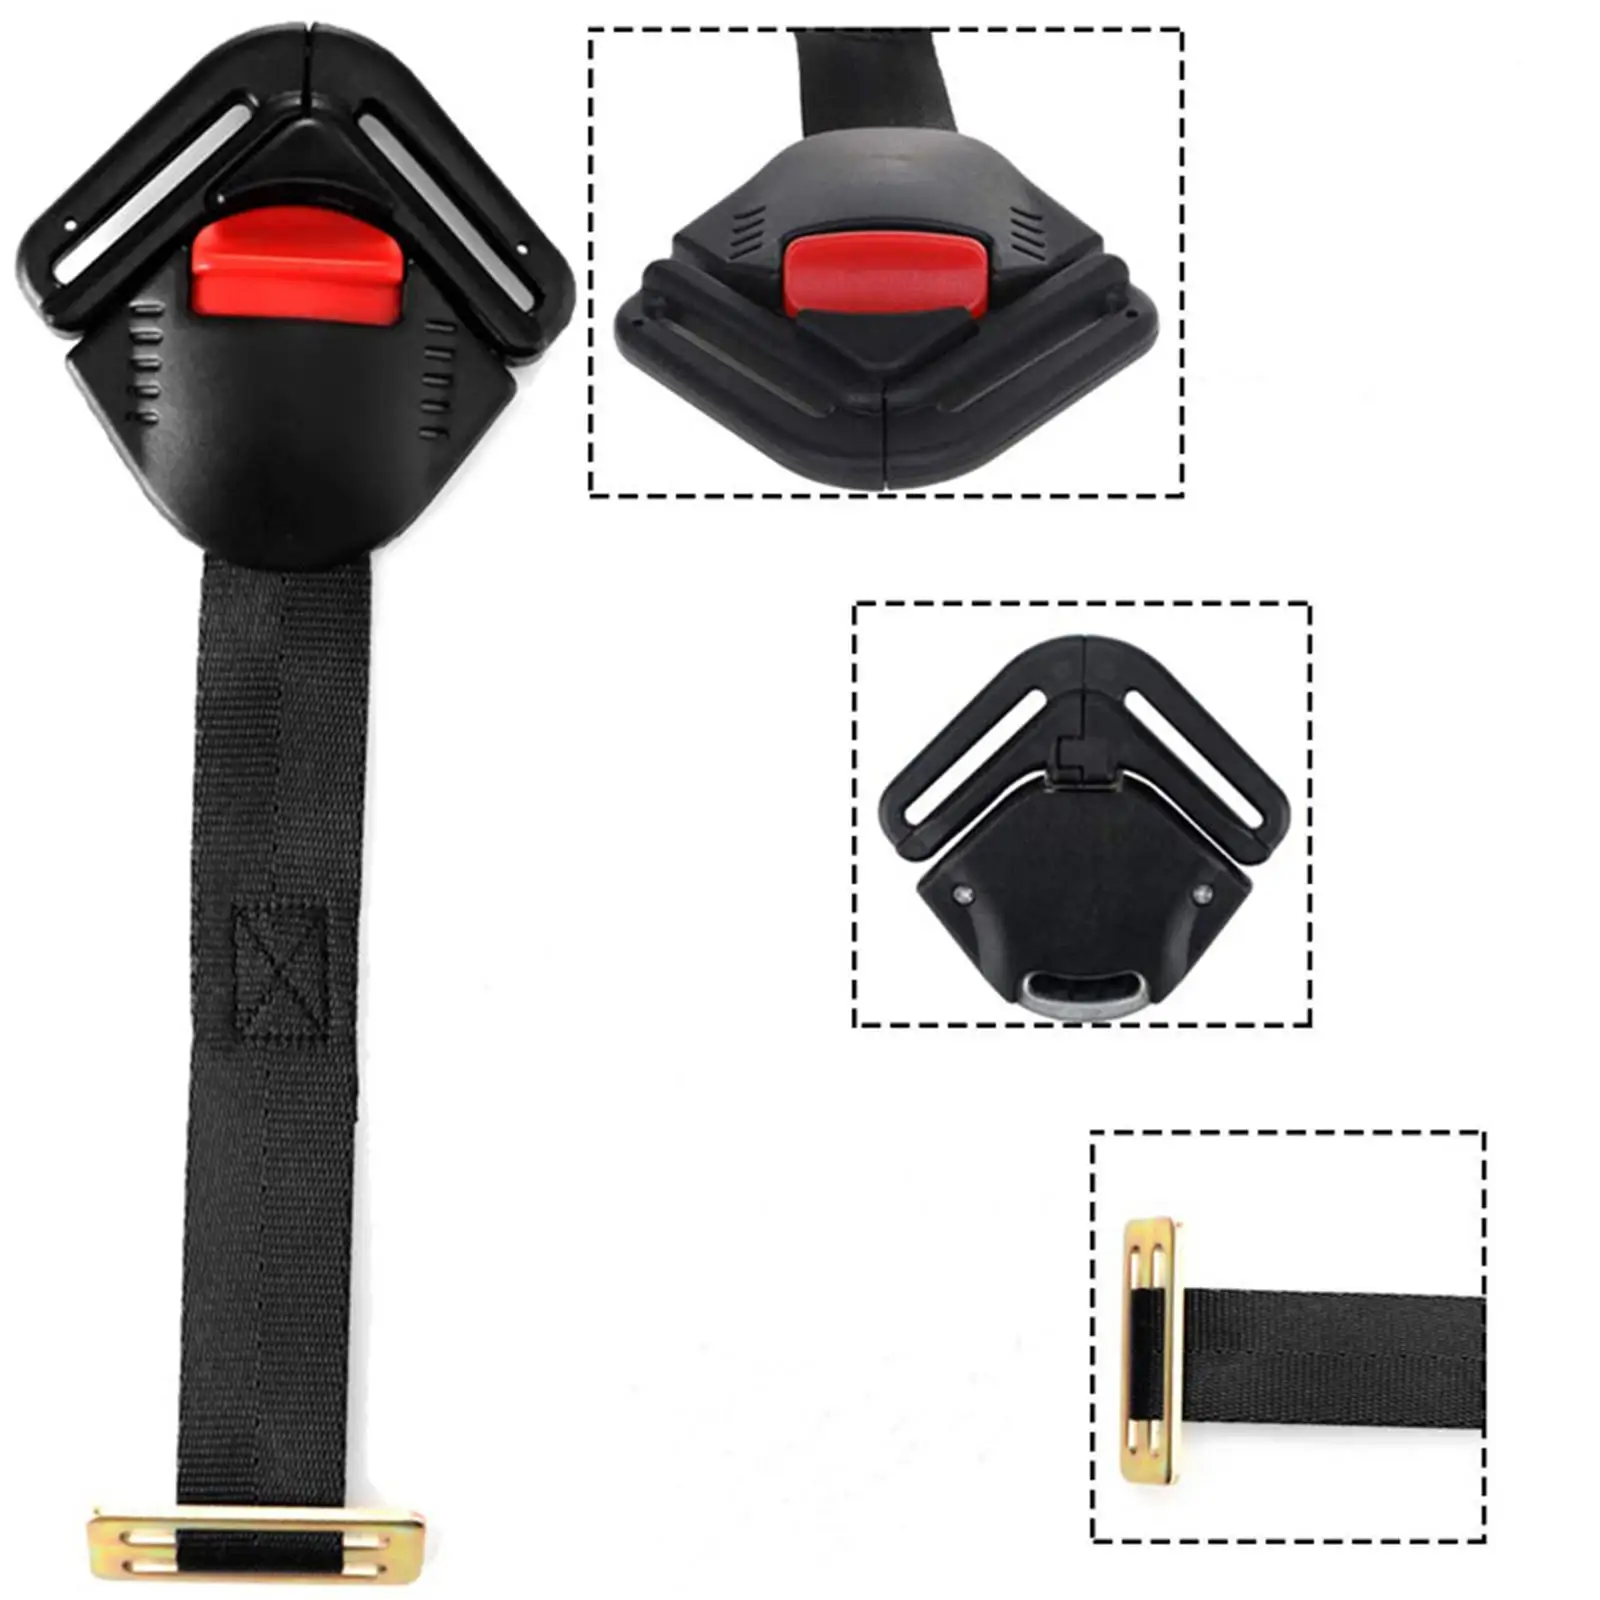 Car Child Seat Safety Belt Buckle 5 Point Toddler Harness Clip Fixed Lock Buckle for Pram Buggy